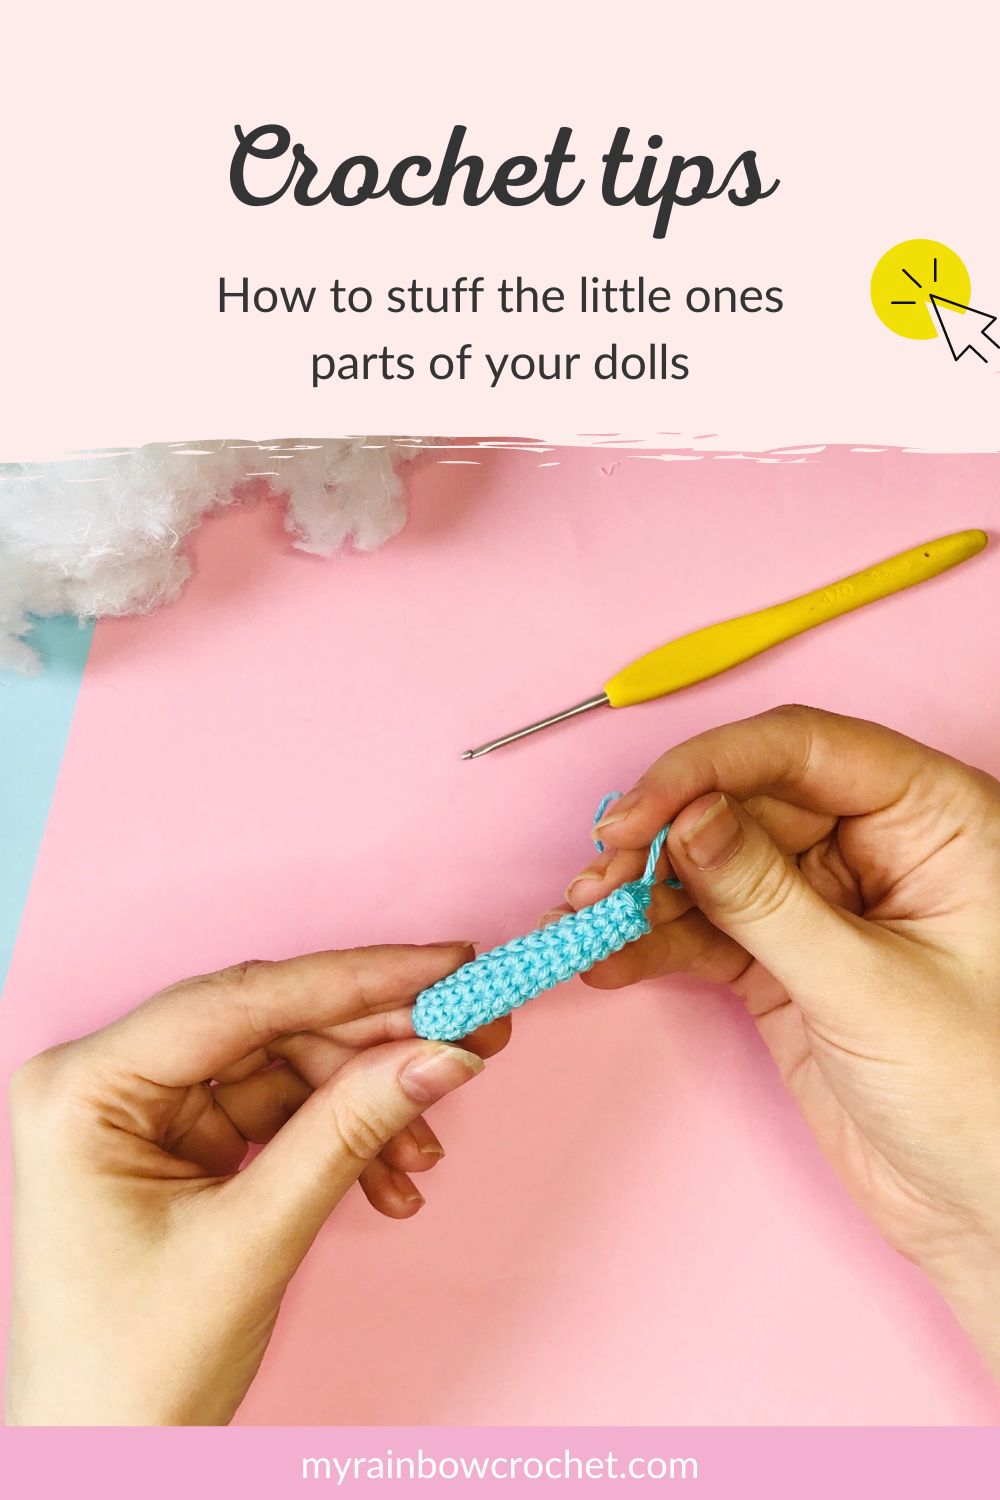 Crochet tip for stuffing small parts - My Rainbow Crochet